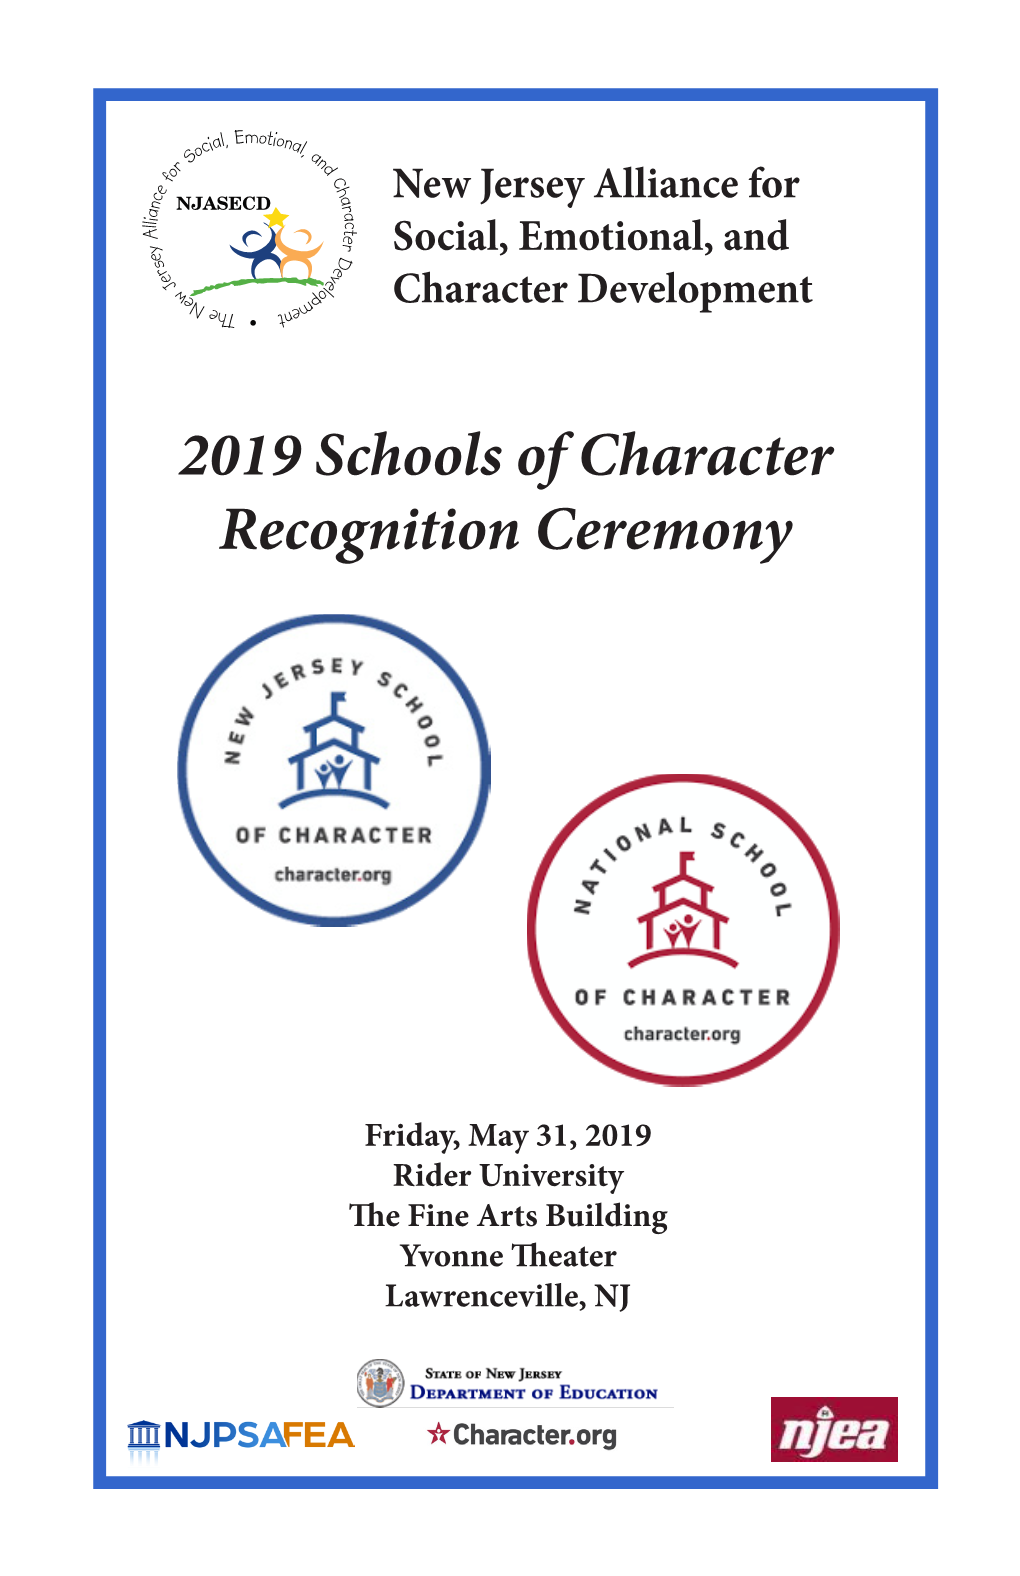 2019 Schools of Character Recognition Ceremony